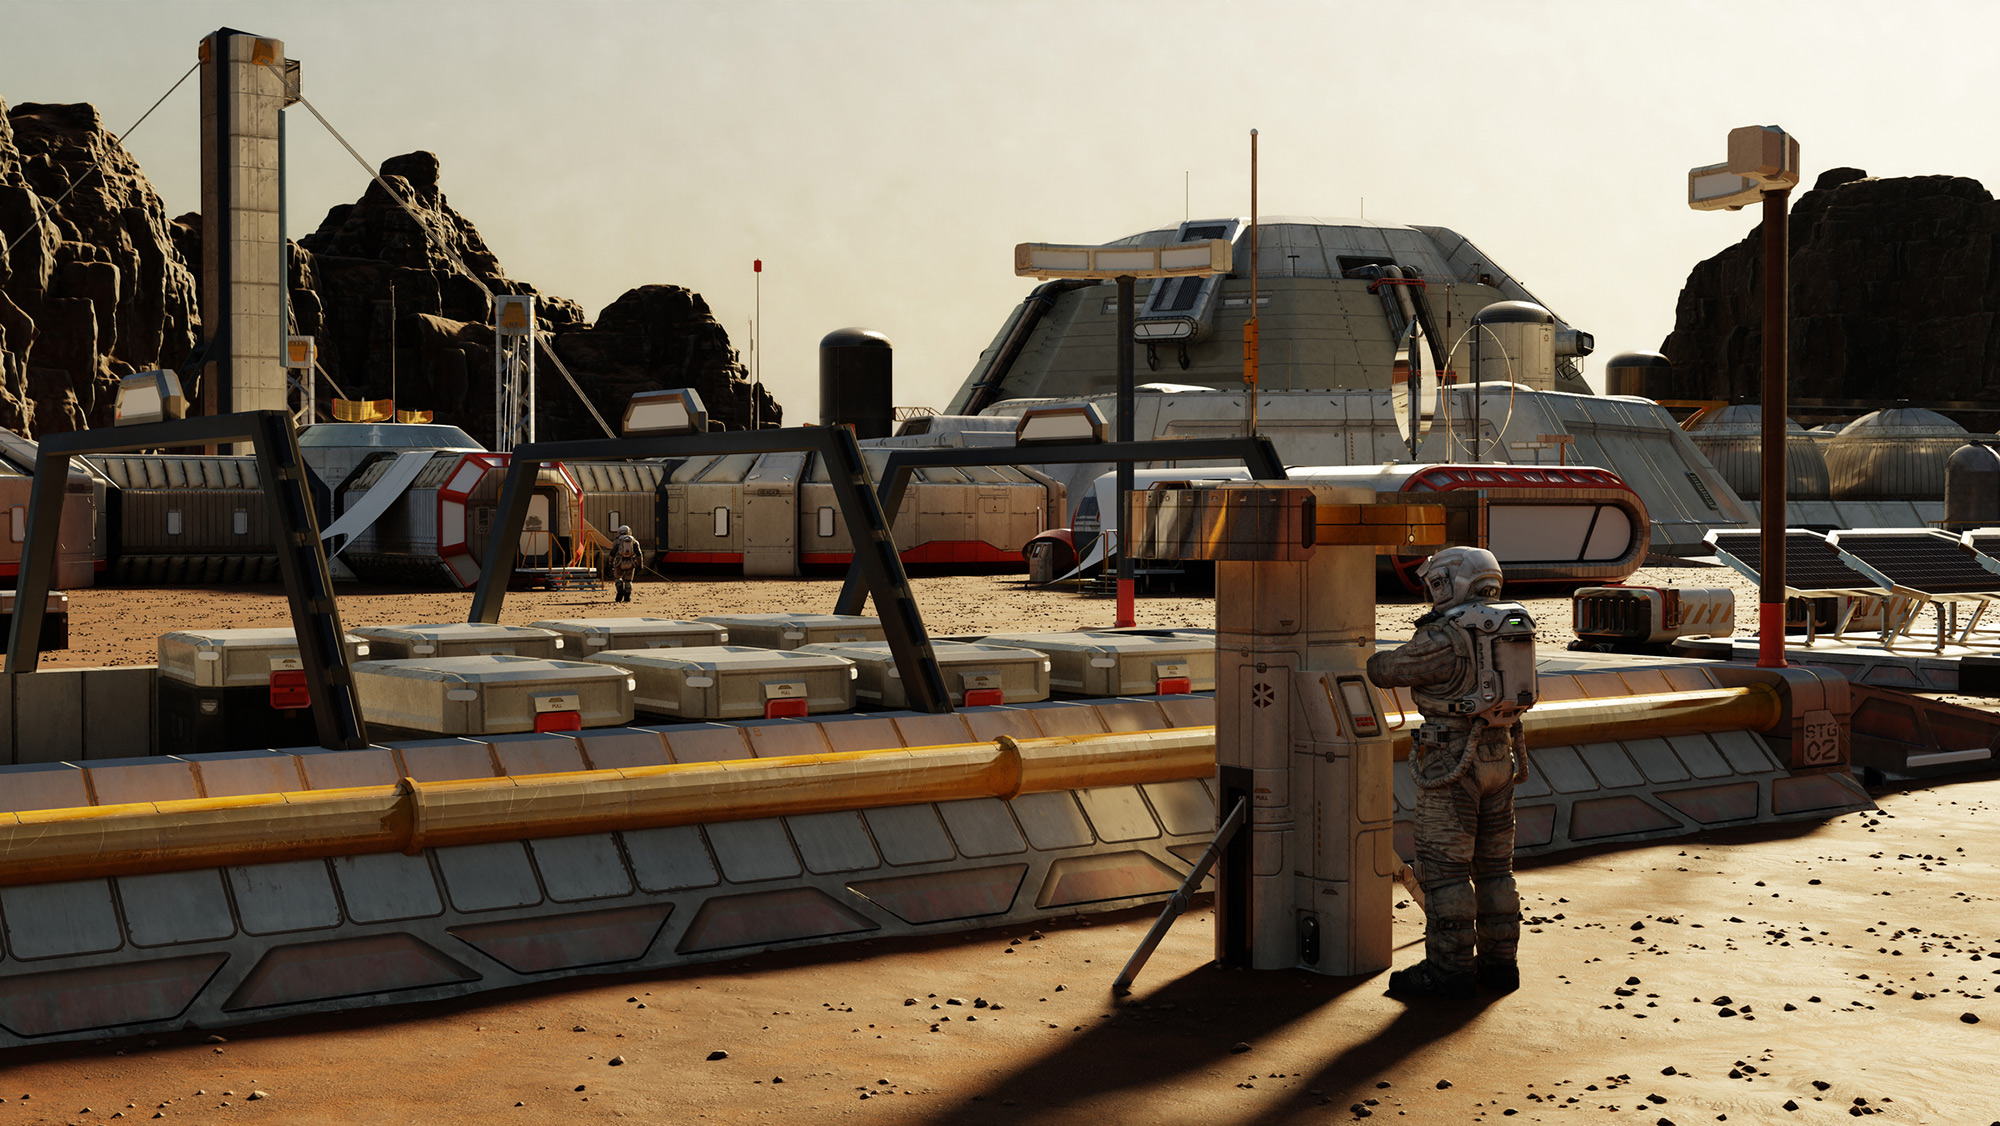 Astronauts performing maintenance at a Mars colony. 